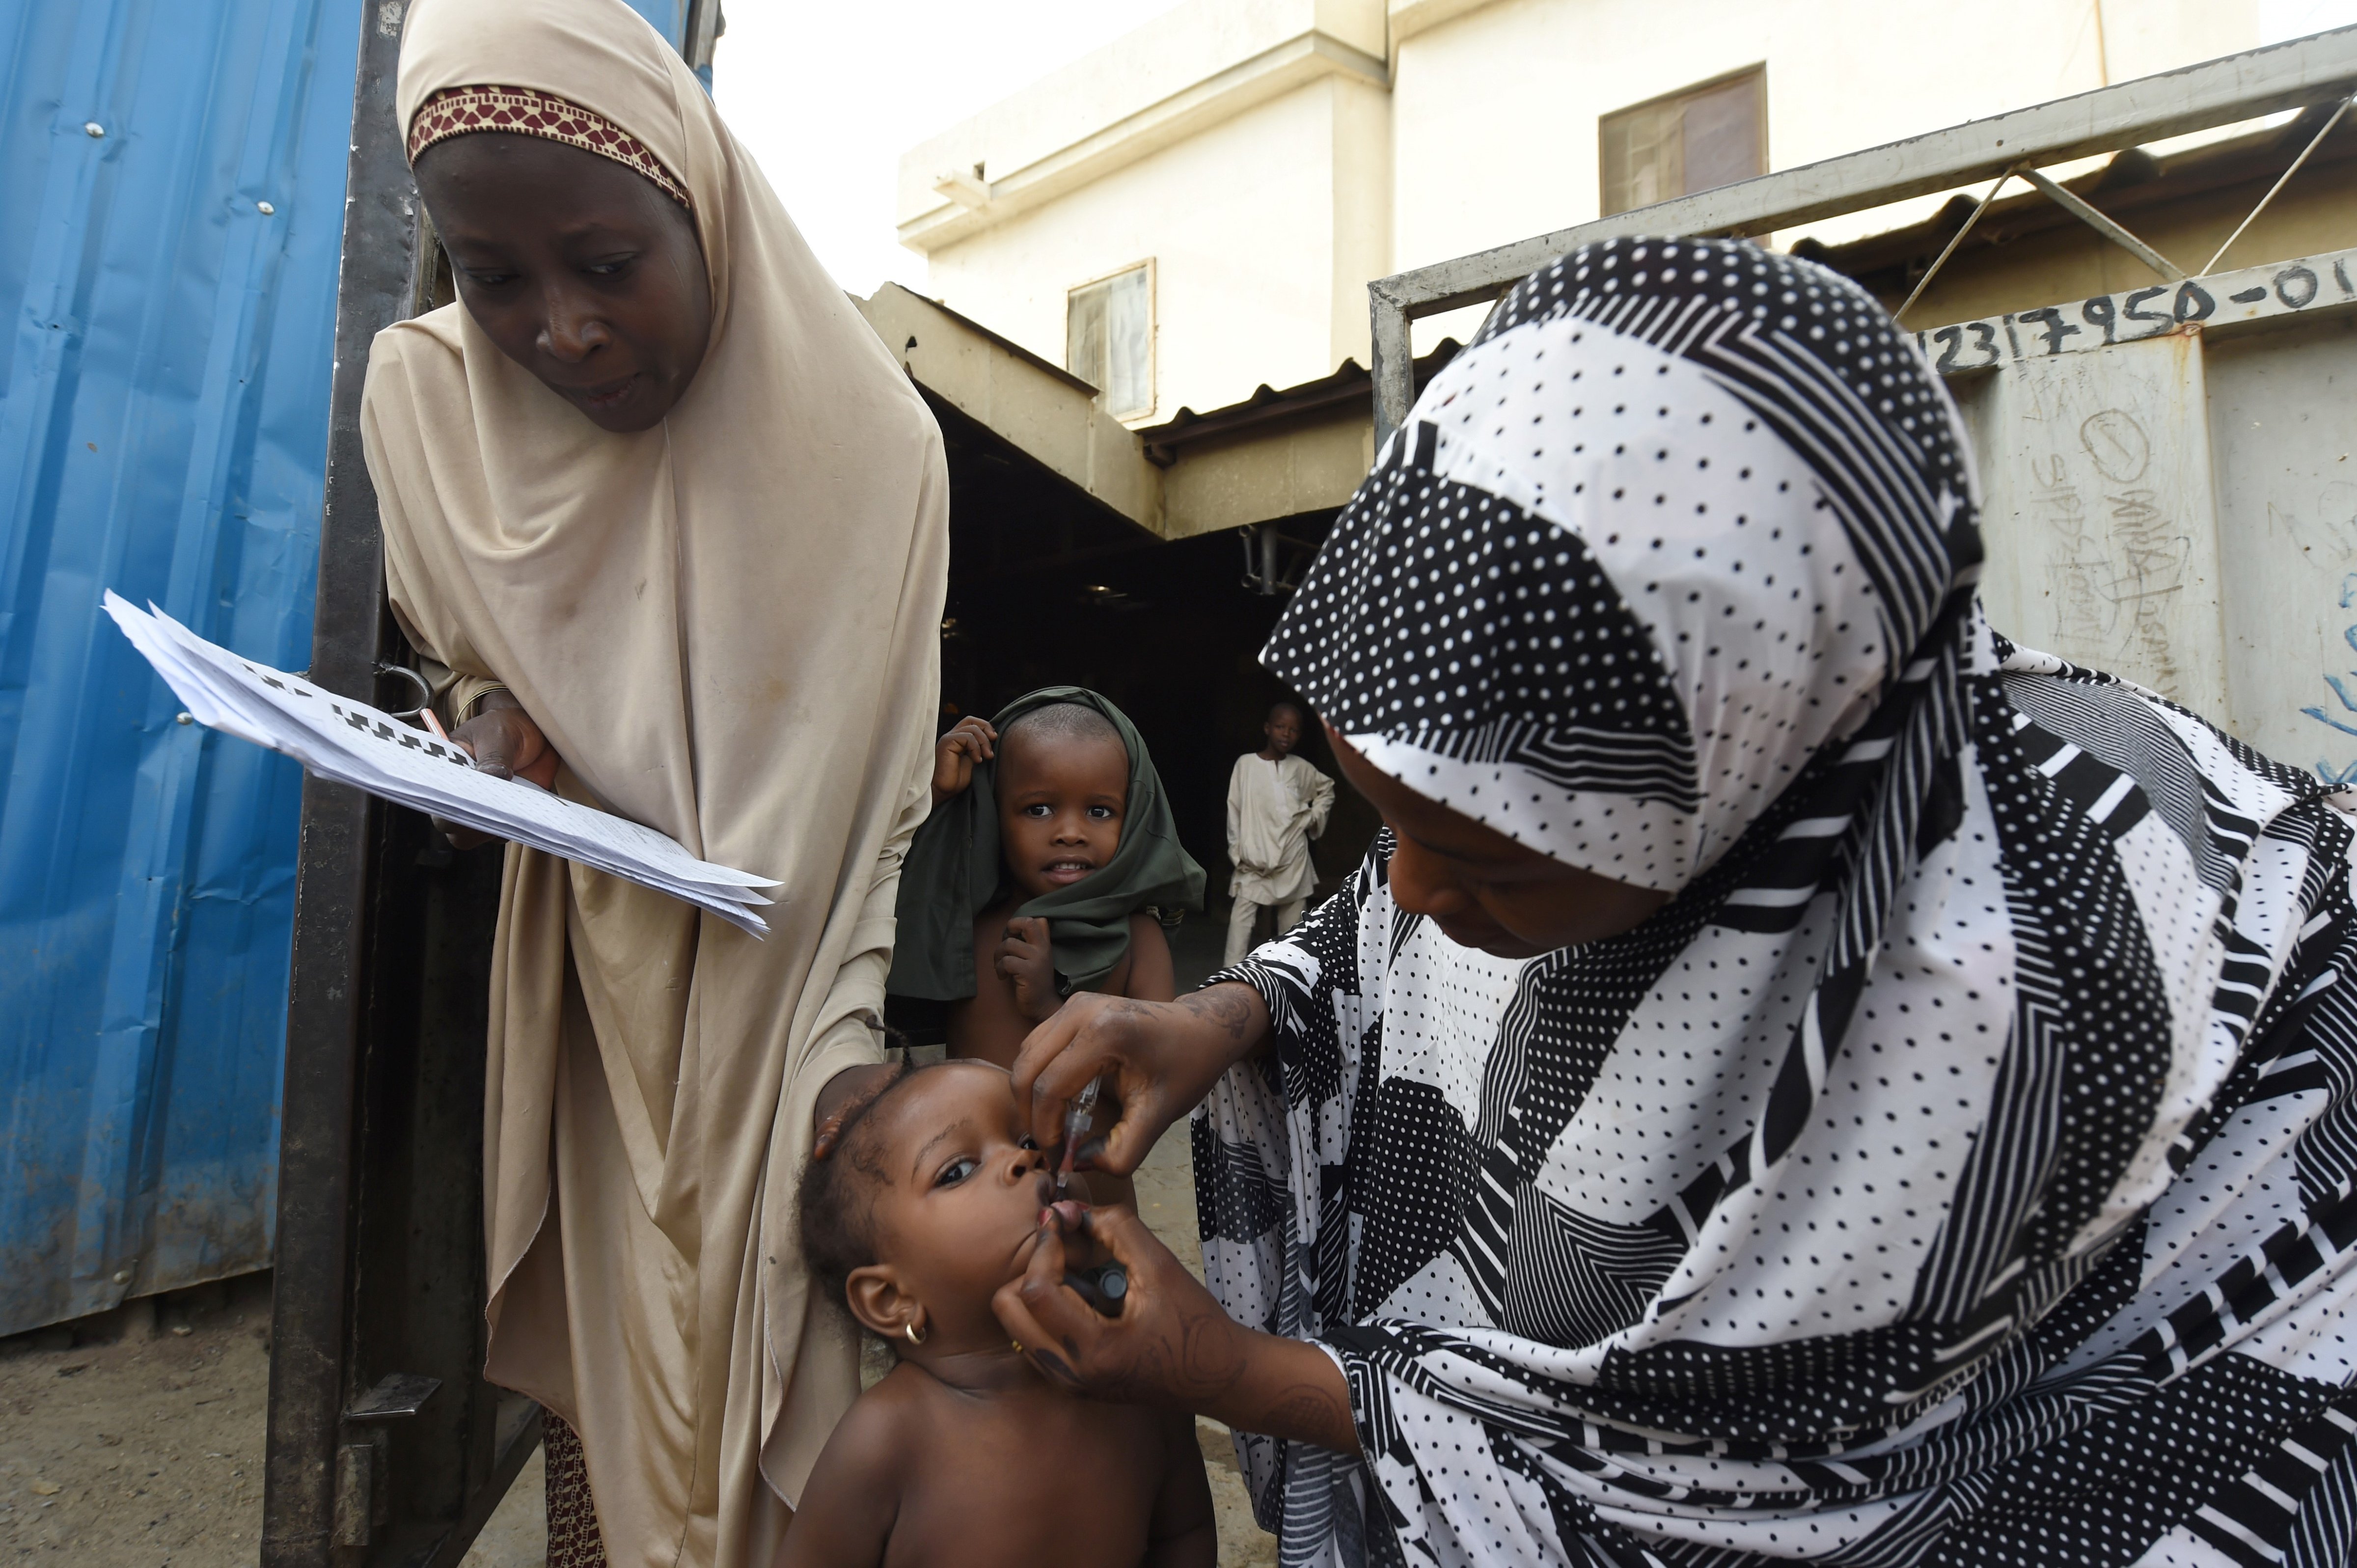 Health worker tries to immunise a child during vaccination campaign against polio at Hotoro-Kudu, Nassarawa district of Kano in northwest Nigeria, on April 22, 2017 (PIUS UTOMI EKPEI -AFP/Getty Images)